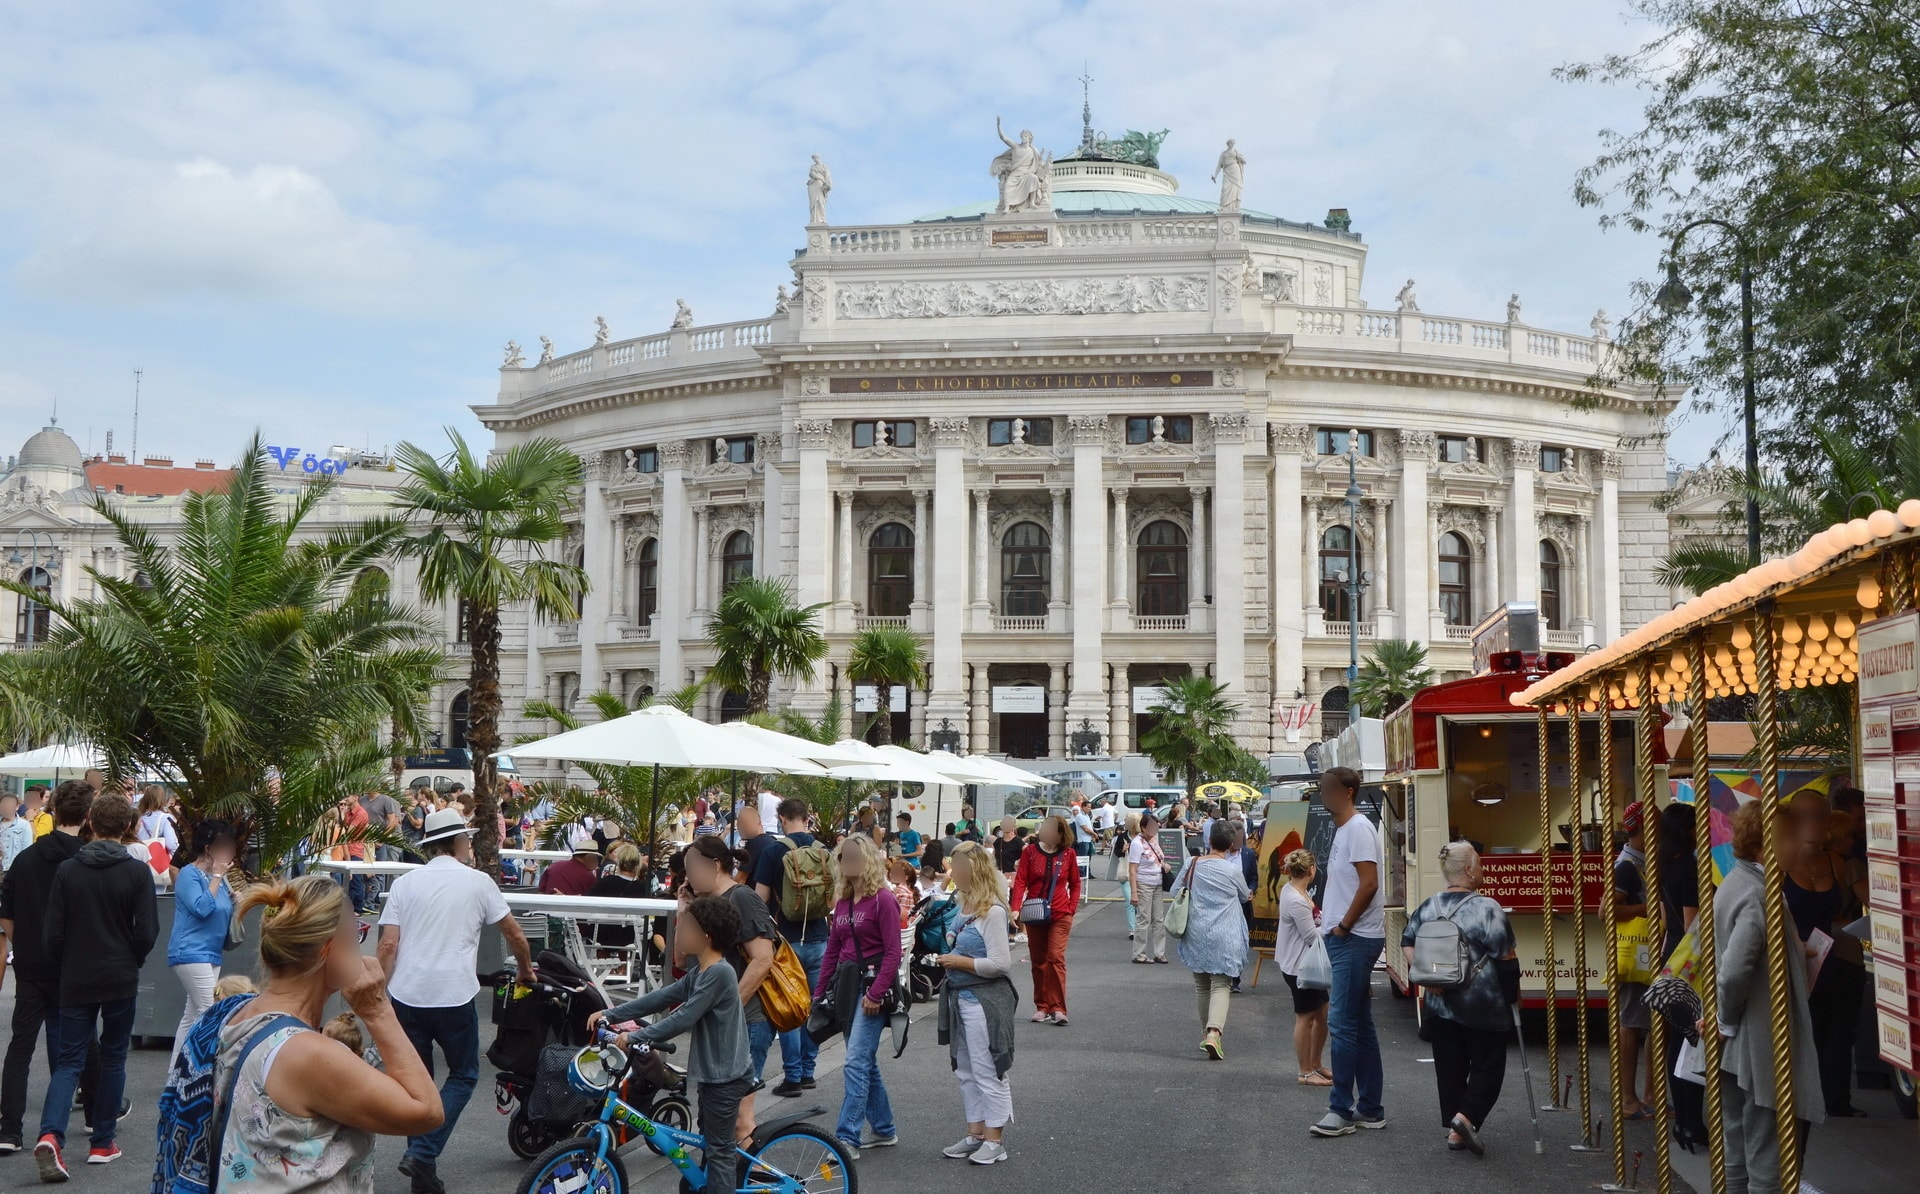 Burgtheater is the National Theatre of Austria and can be found in fron of the Rathausplatz square